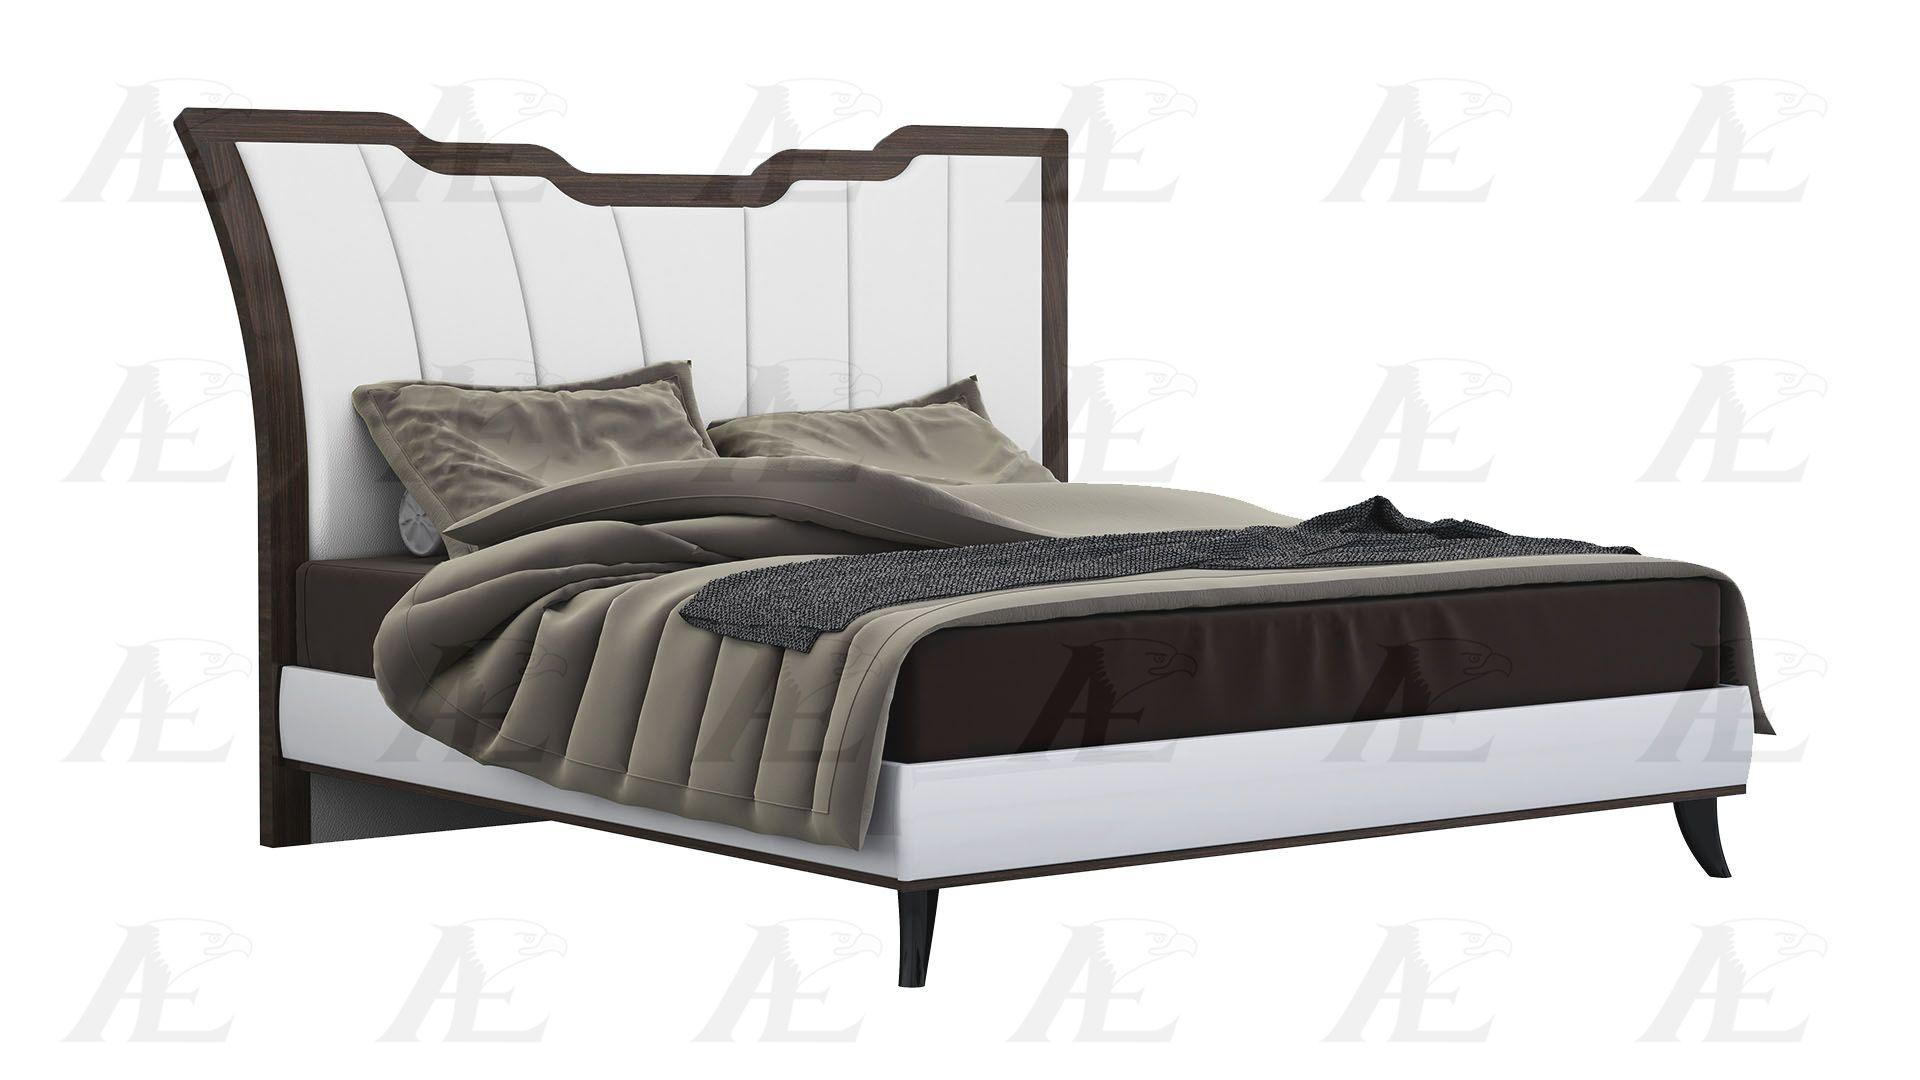 

    
American Eagle Furniture B-P105 Palisander Brown White Finish Queen Size Bed Wood Modern
